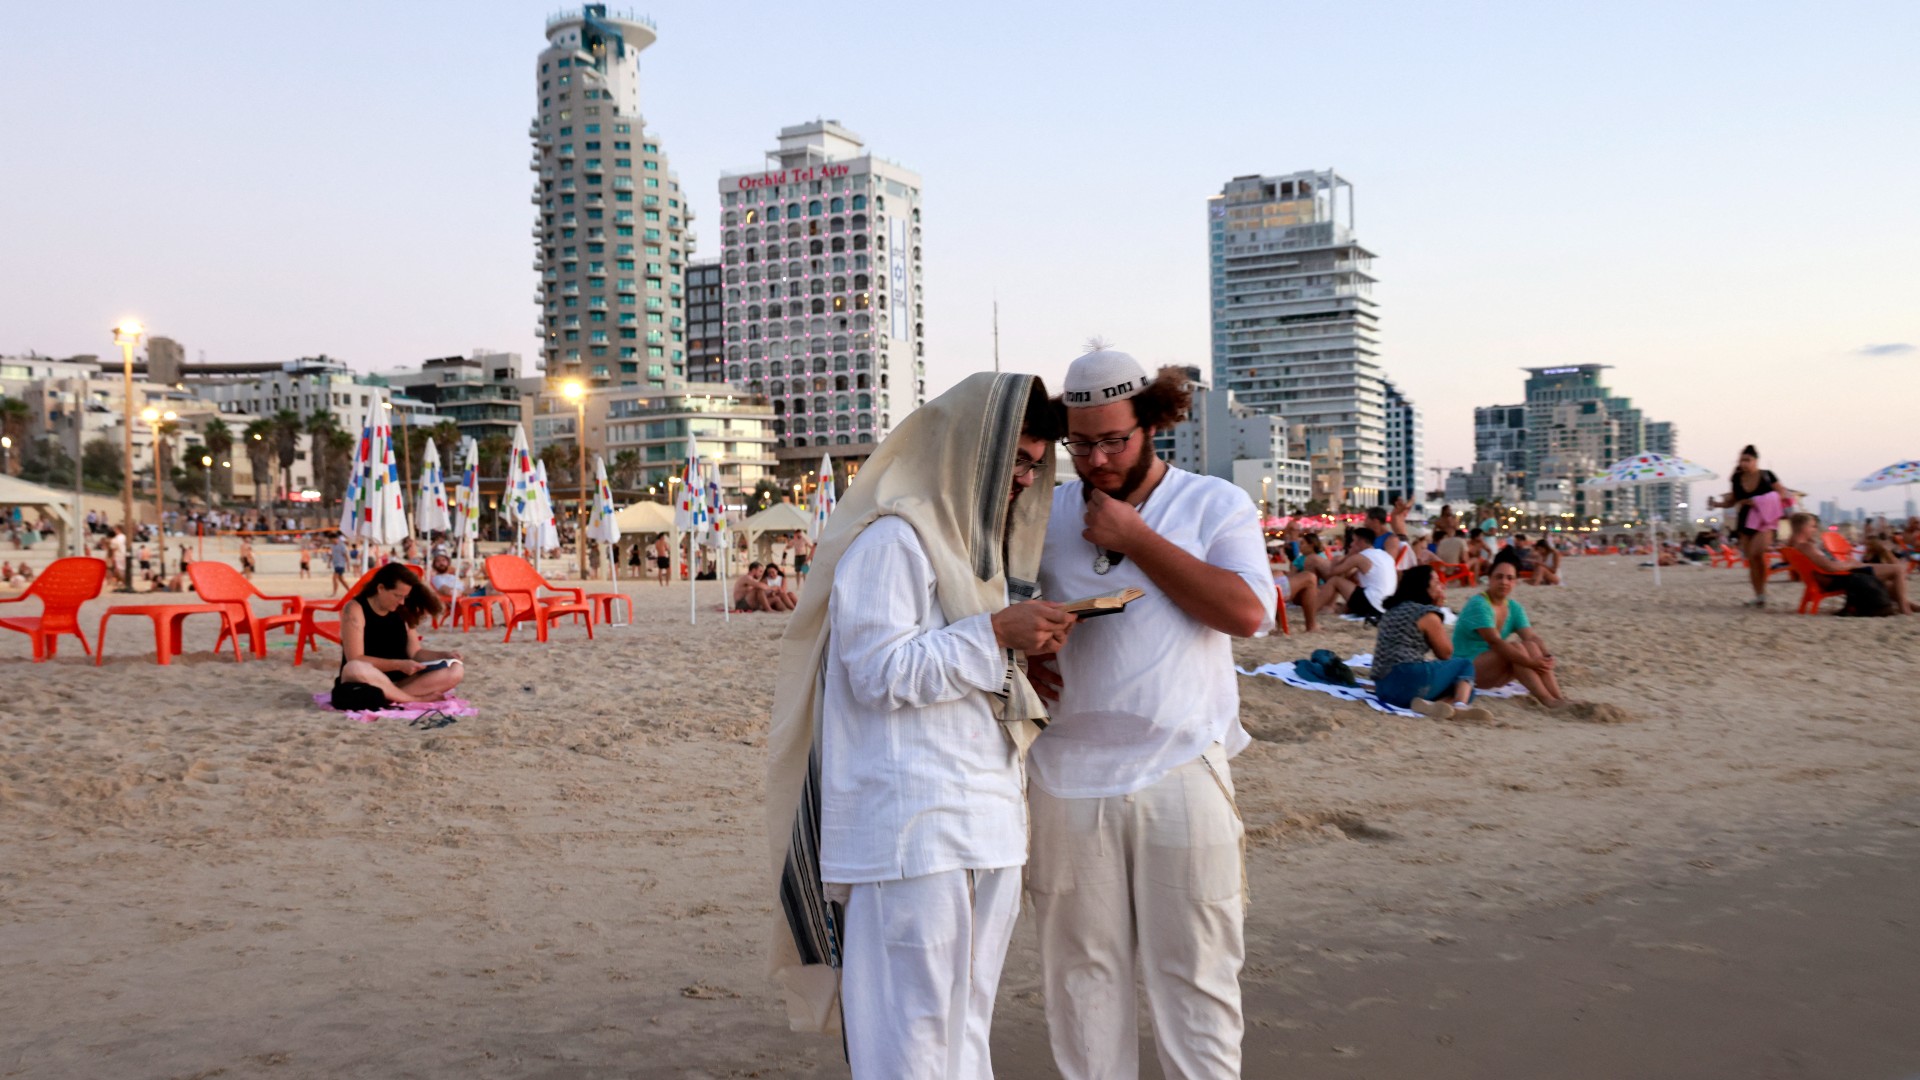 Religious men read from a book on Tel Aviv's shore (AFP)